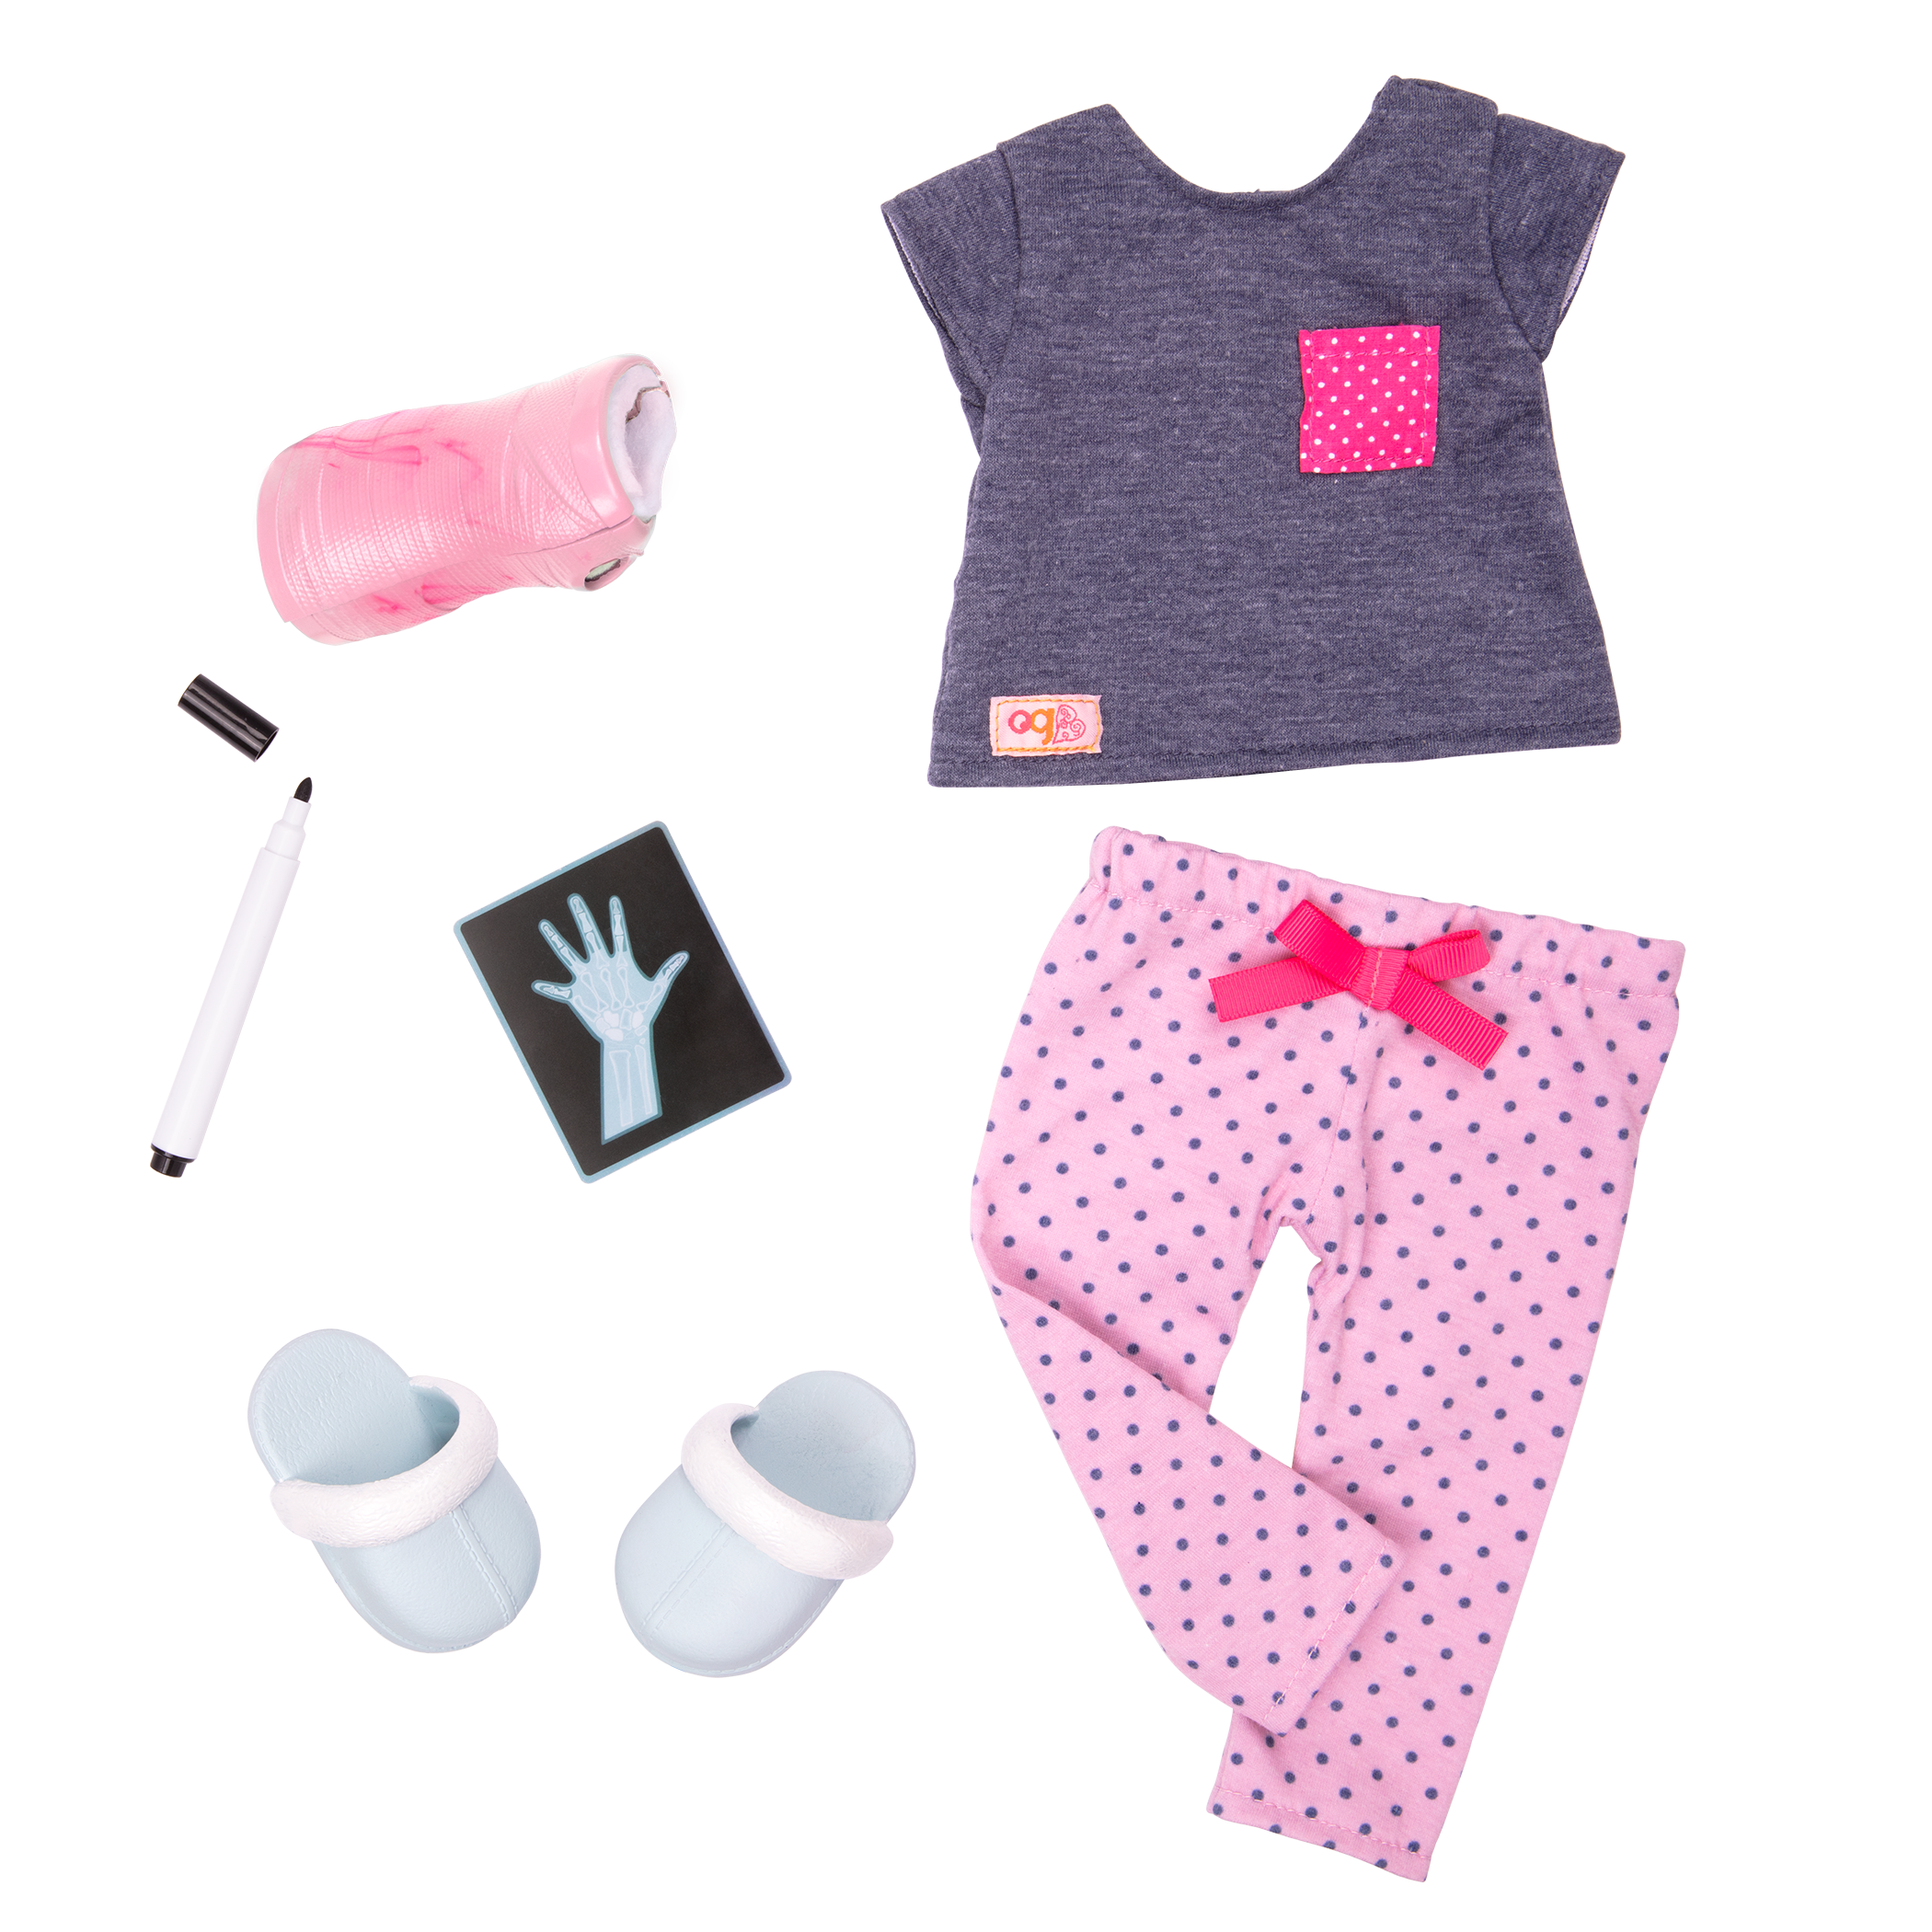 4 PIECE PINK TOP   SET FOR  OUR GENERATION  DOLL 